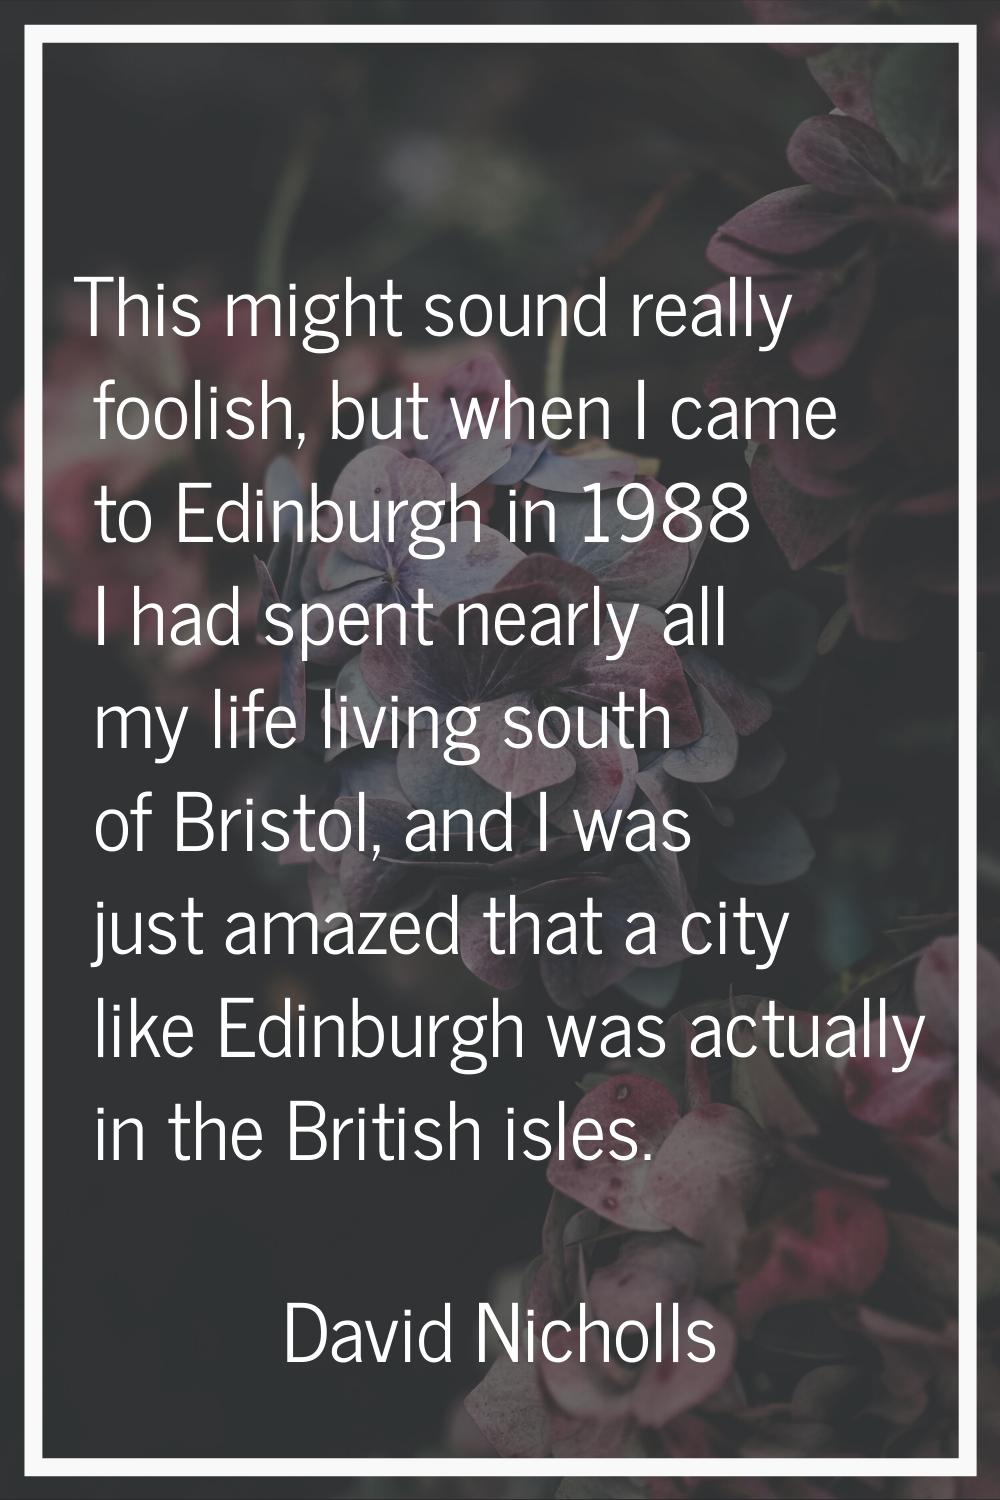 This might sound really foolish, but when I came to Edinburgh in 1988 I had spent nearly all my lif